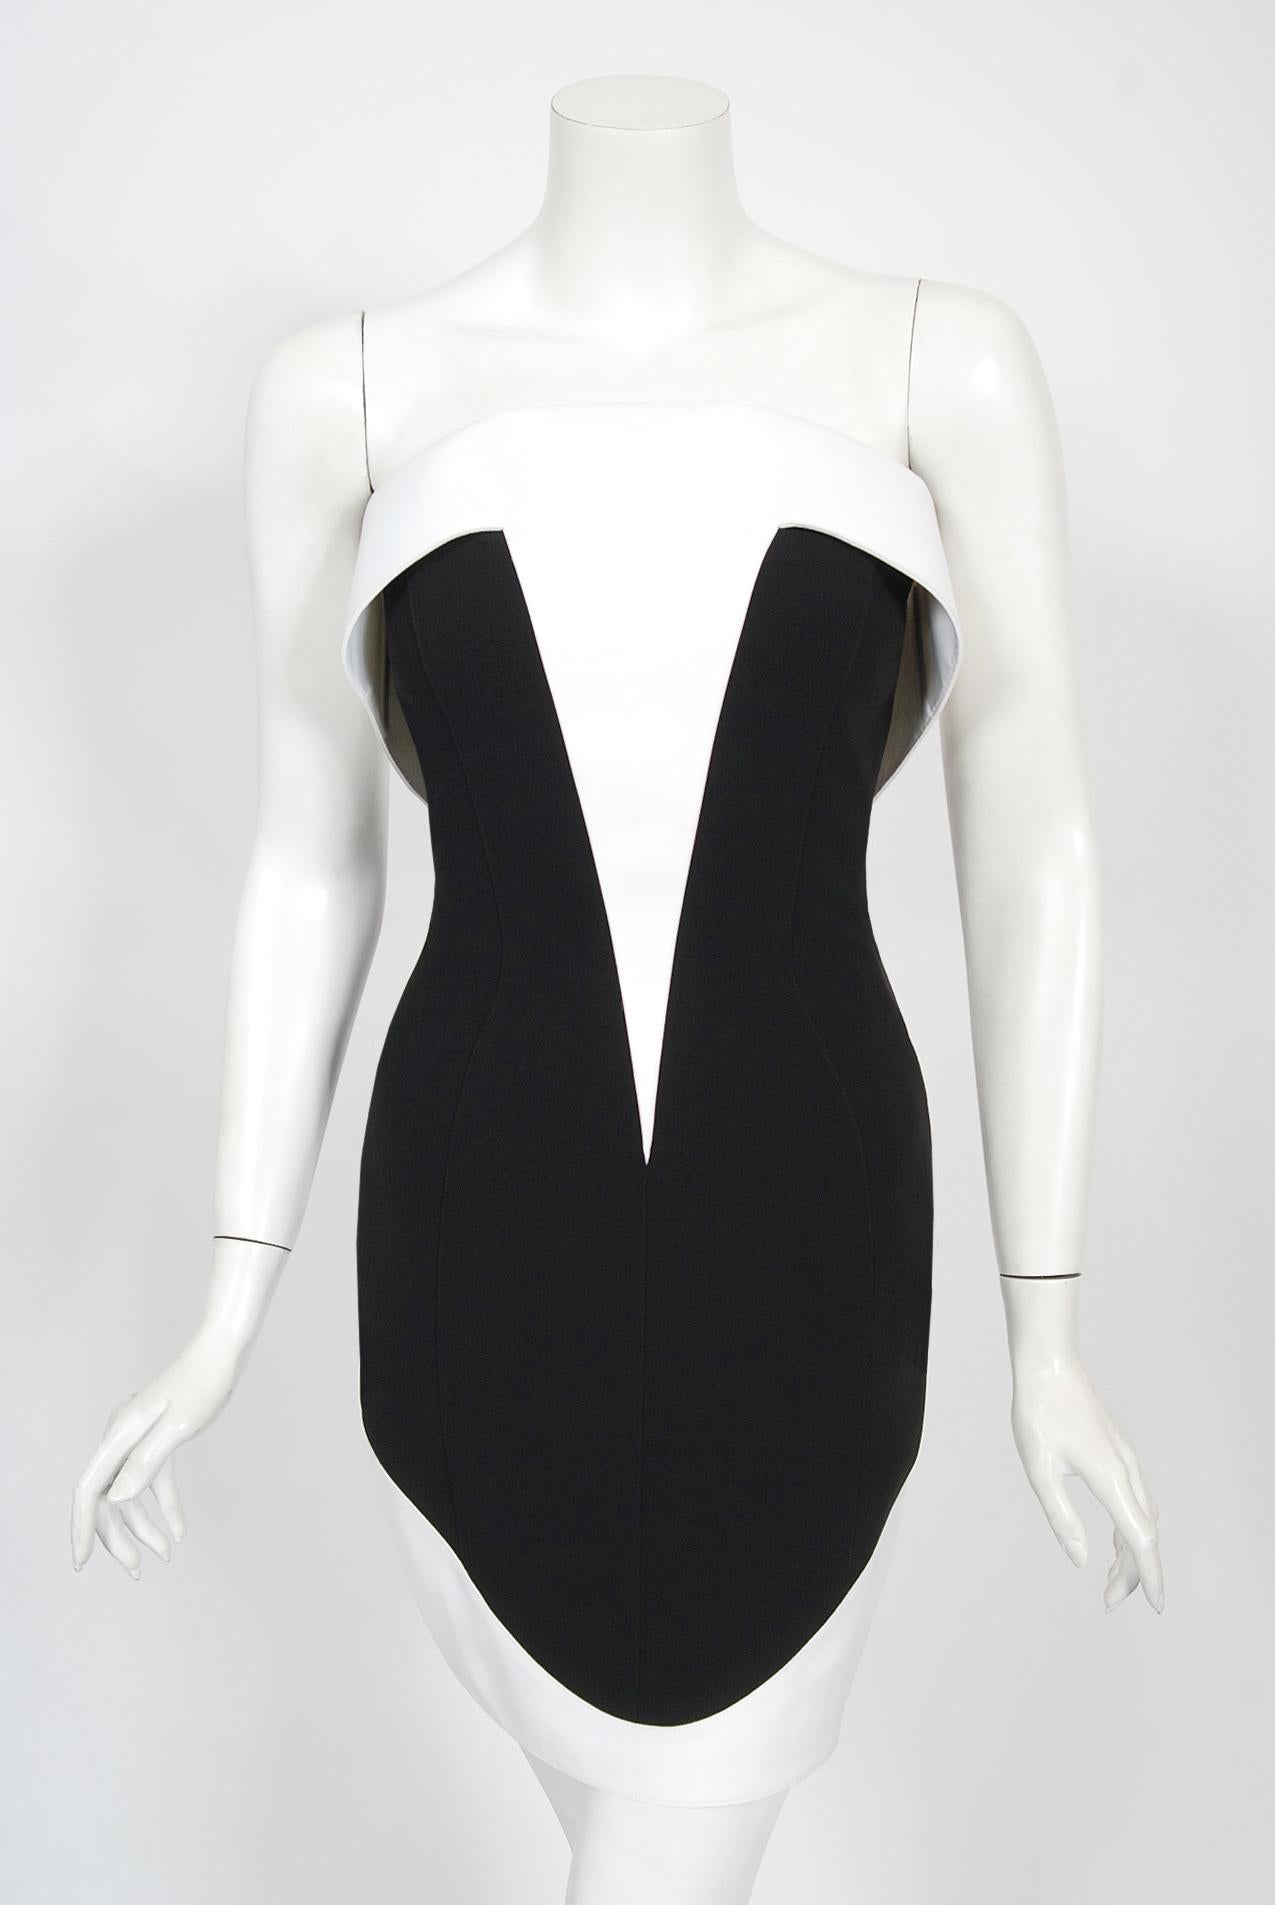 An iconic and truly timeless Thierry Mugler 1996 spring-summer collection strapless mini dress. This legendary French fashion designer is known for bold fashion and edgy, sometimes even campy, theatricality. Though Mugler stopped designing his